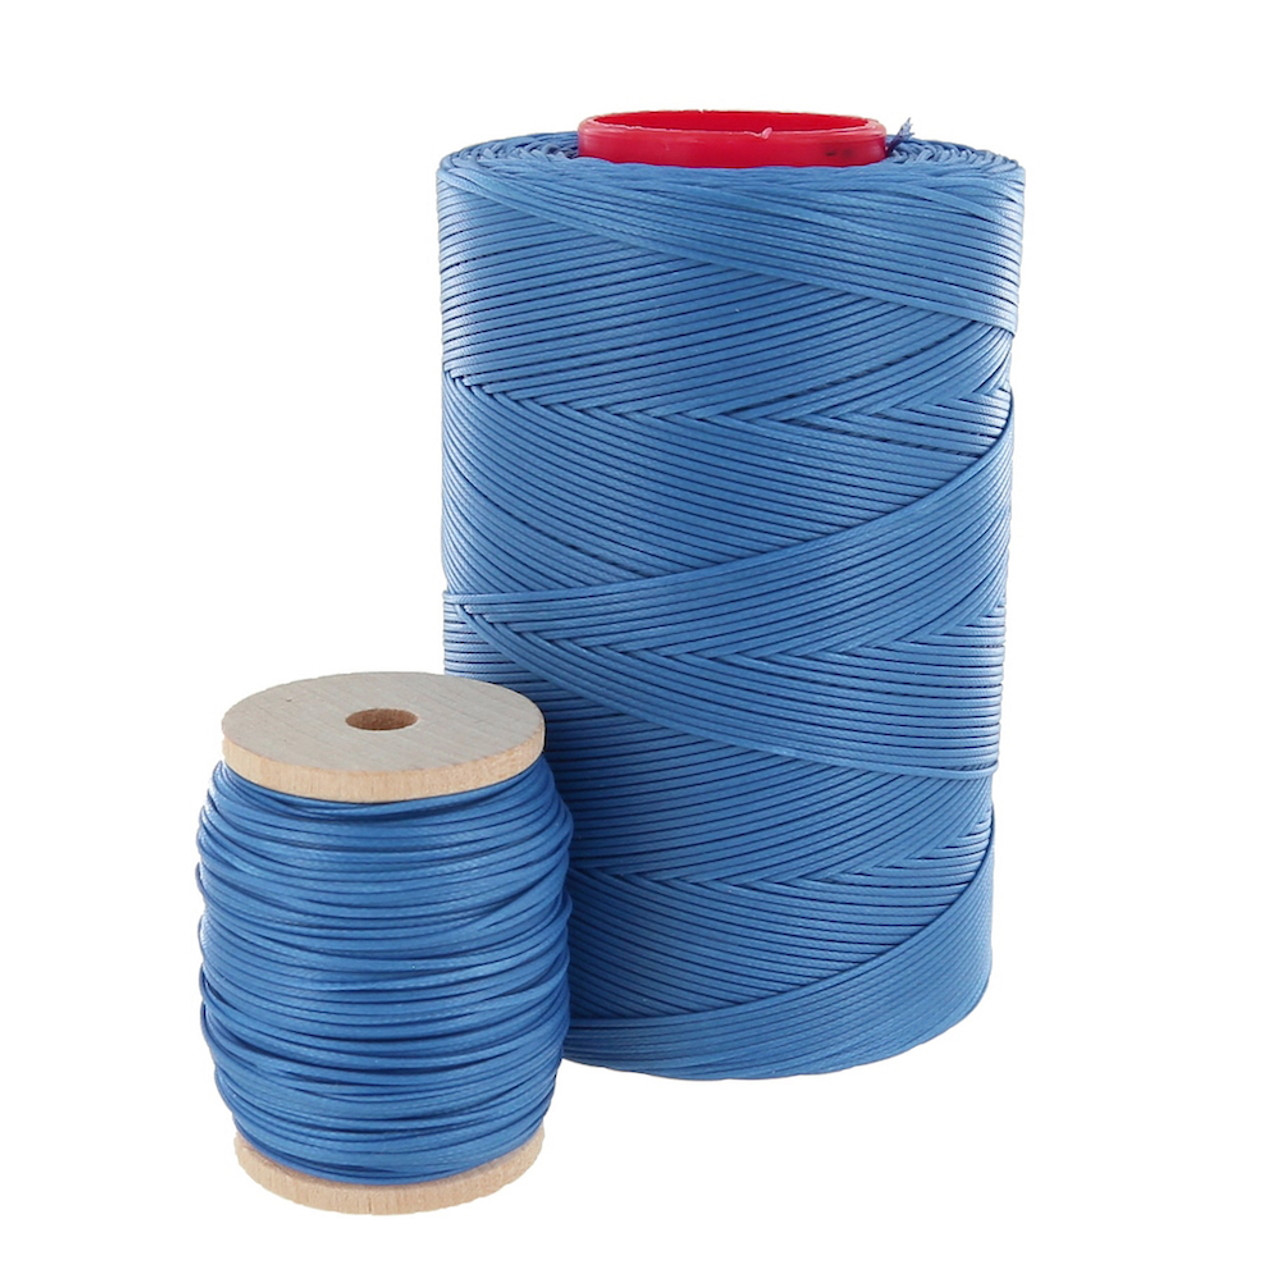 Tiger Thread Ritza25 : (50 Metre Lengths) The Favourite Waxed Hand